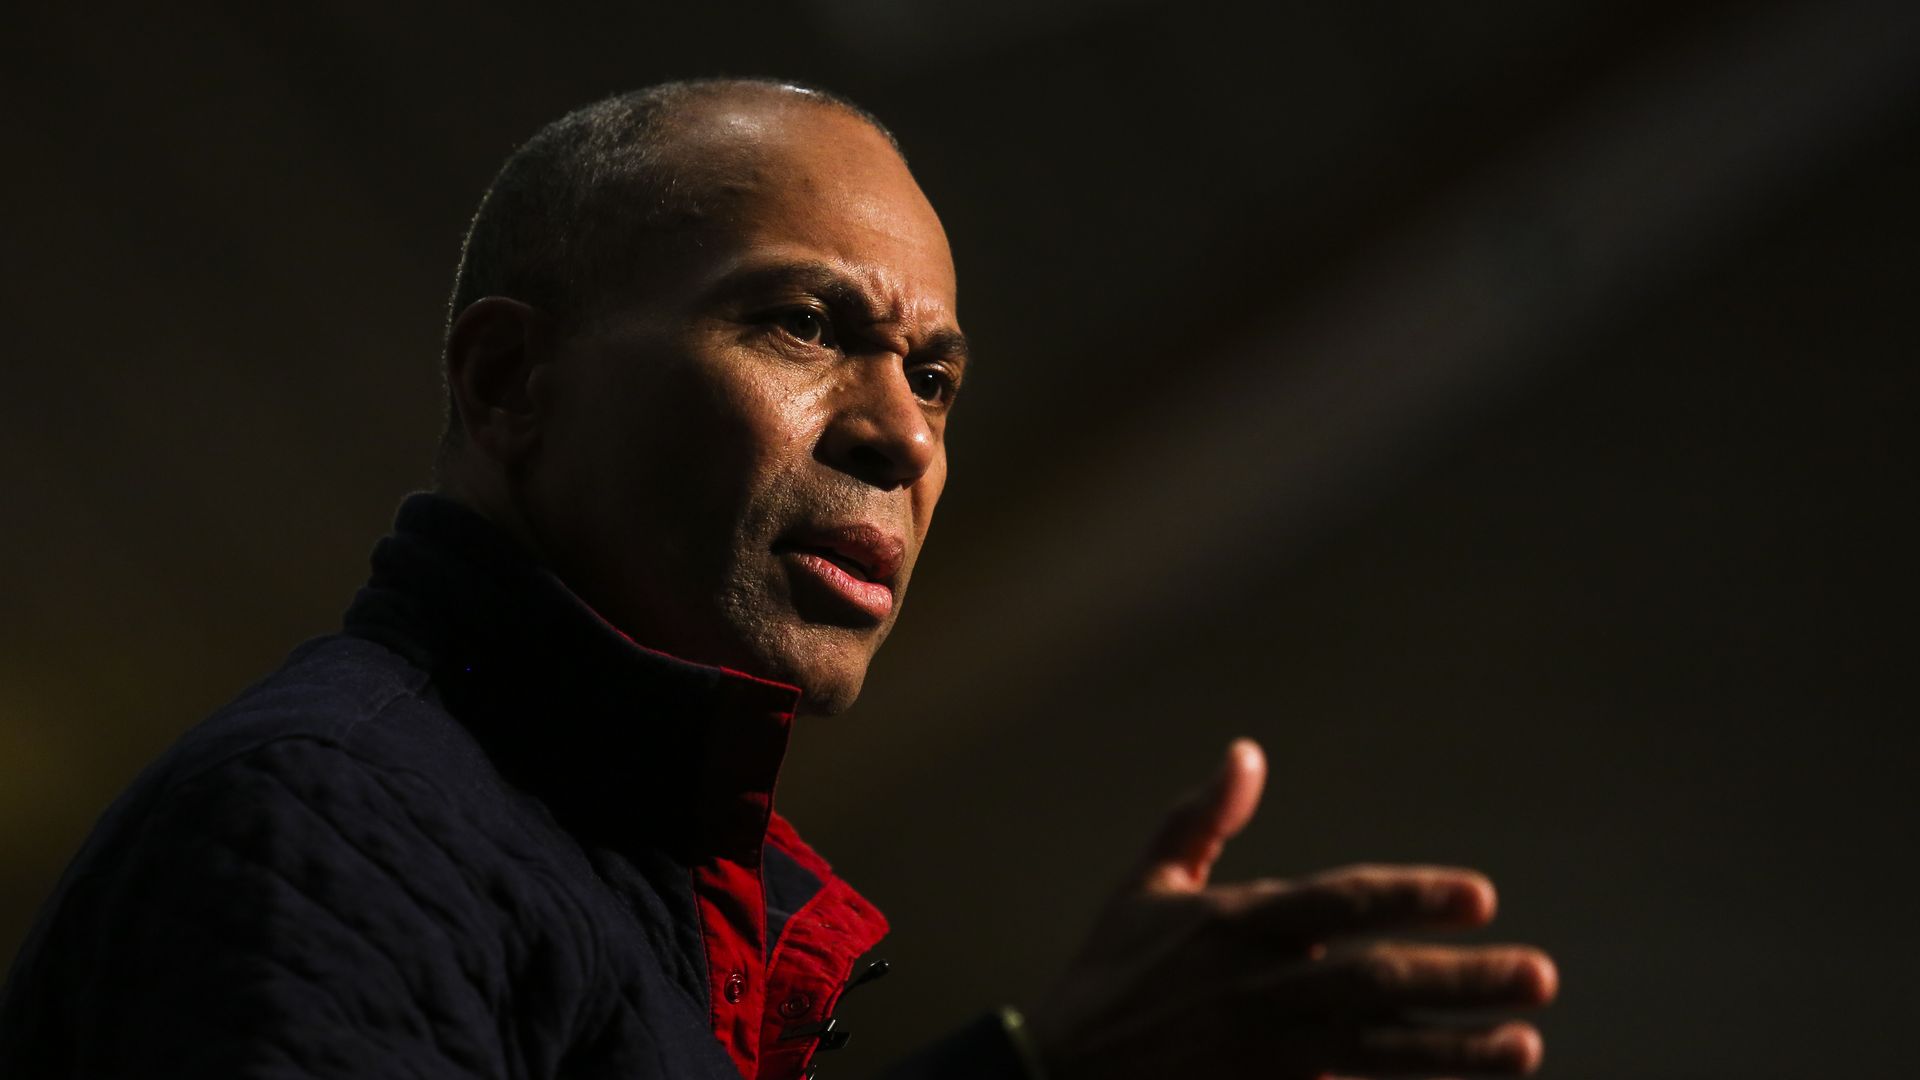 Close-up shot of former Massachusetts Governor Deval Patrick at a presidential campaign event